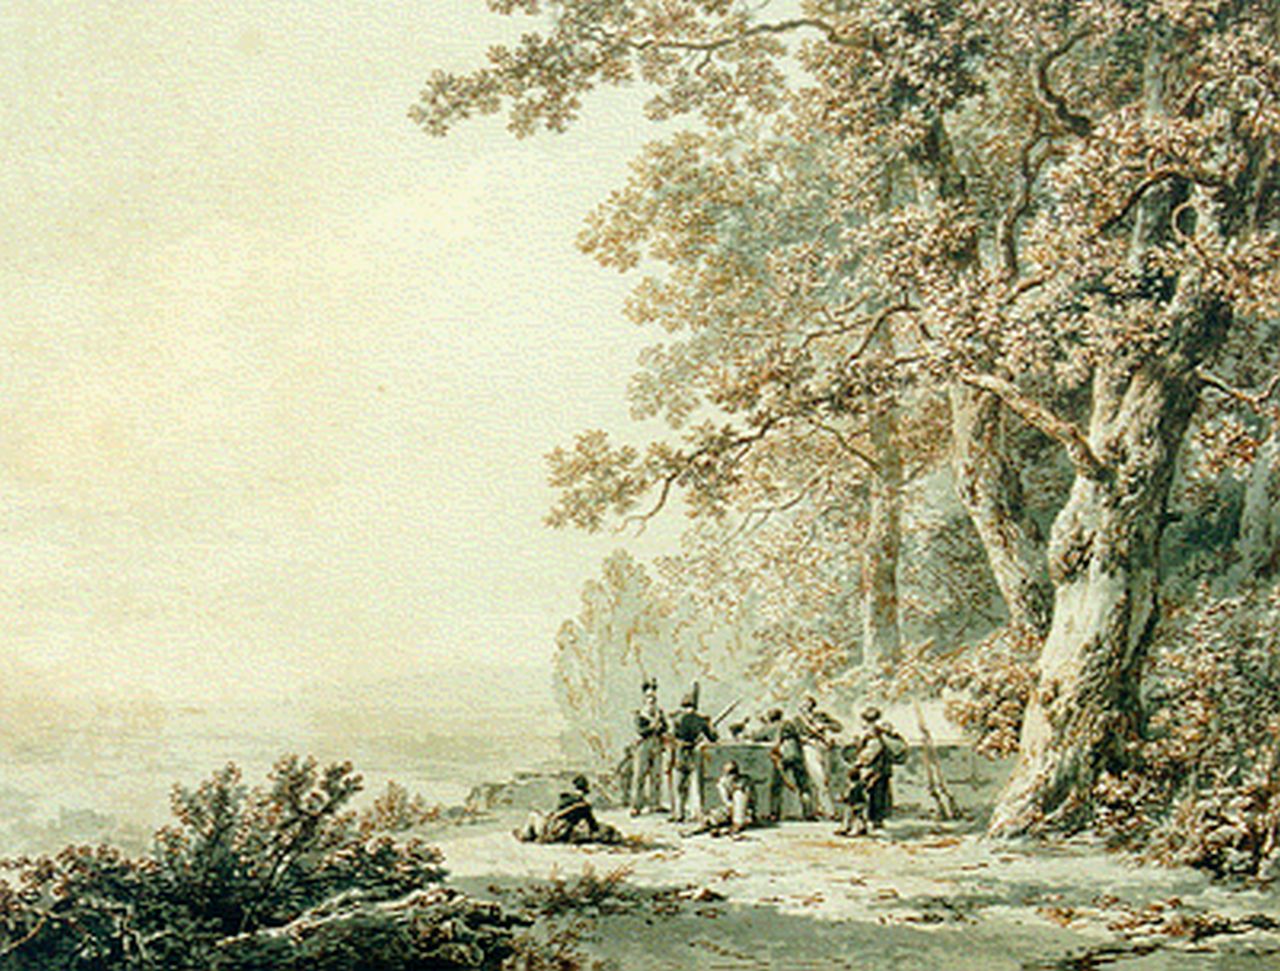 Koekkoek B.C.  | Barend Cornelis Koekkoek, Soldiers in a panoramic landscape, sepia on paper 25.2 x 32.7 cm, signed l.r. and dated 1830